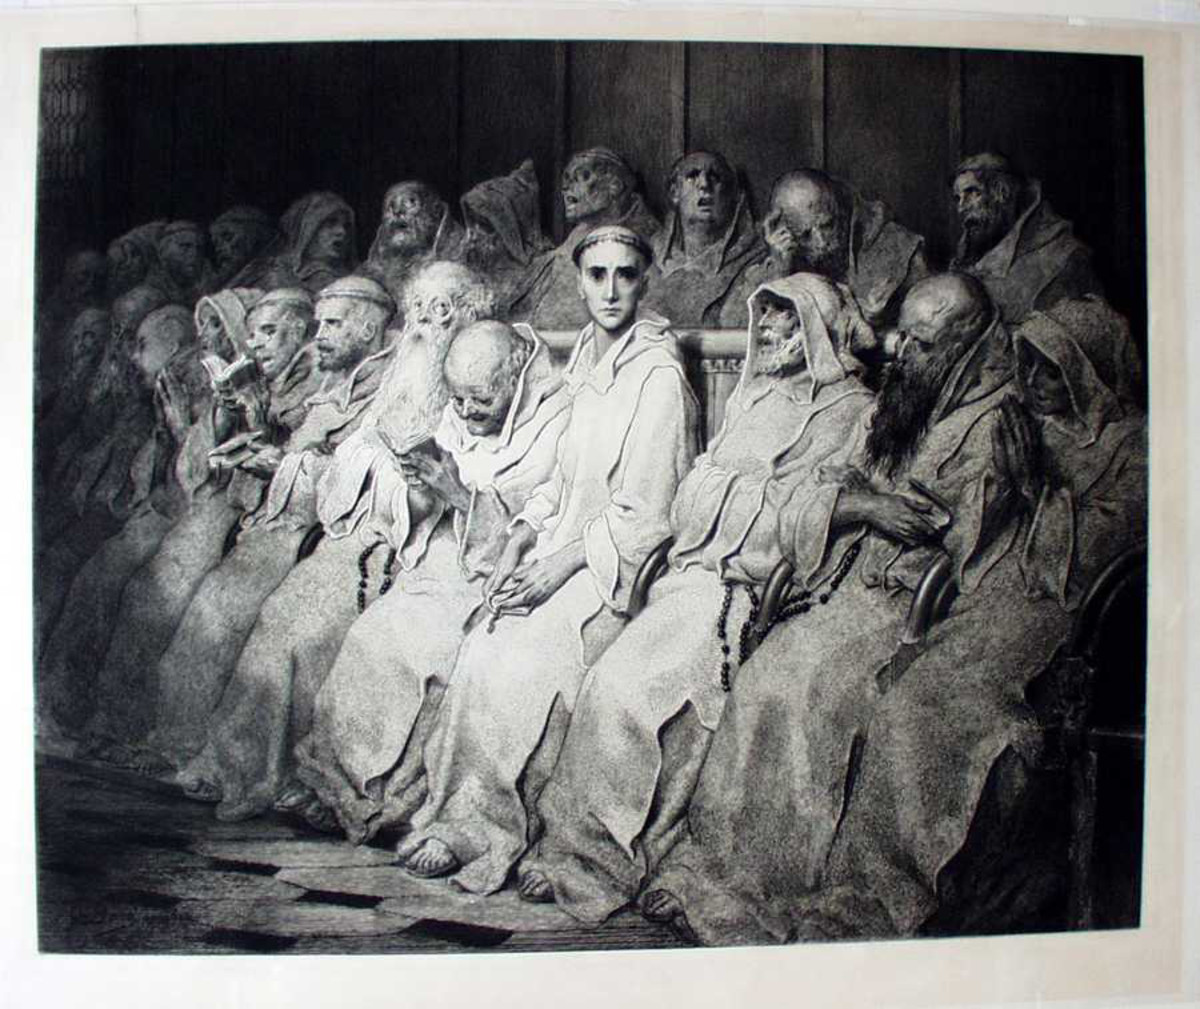 "NEOPHYTE" BY GUSTAVE DORE